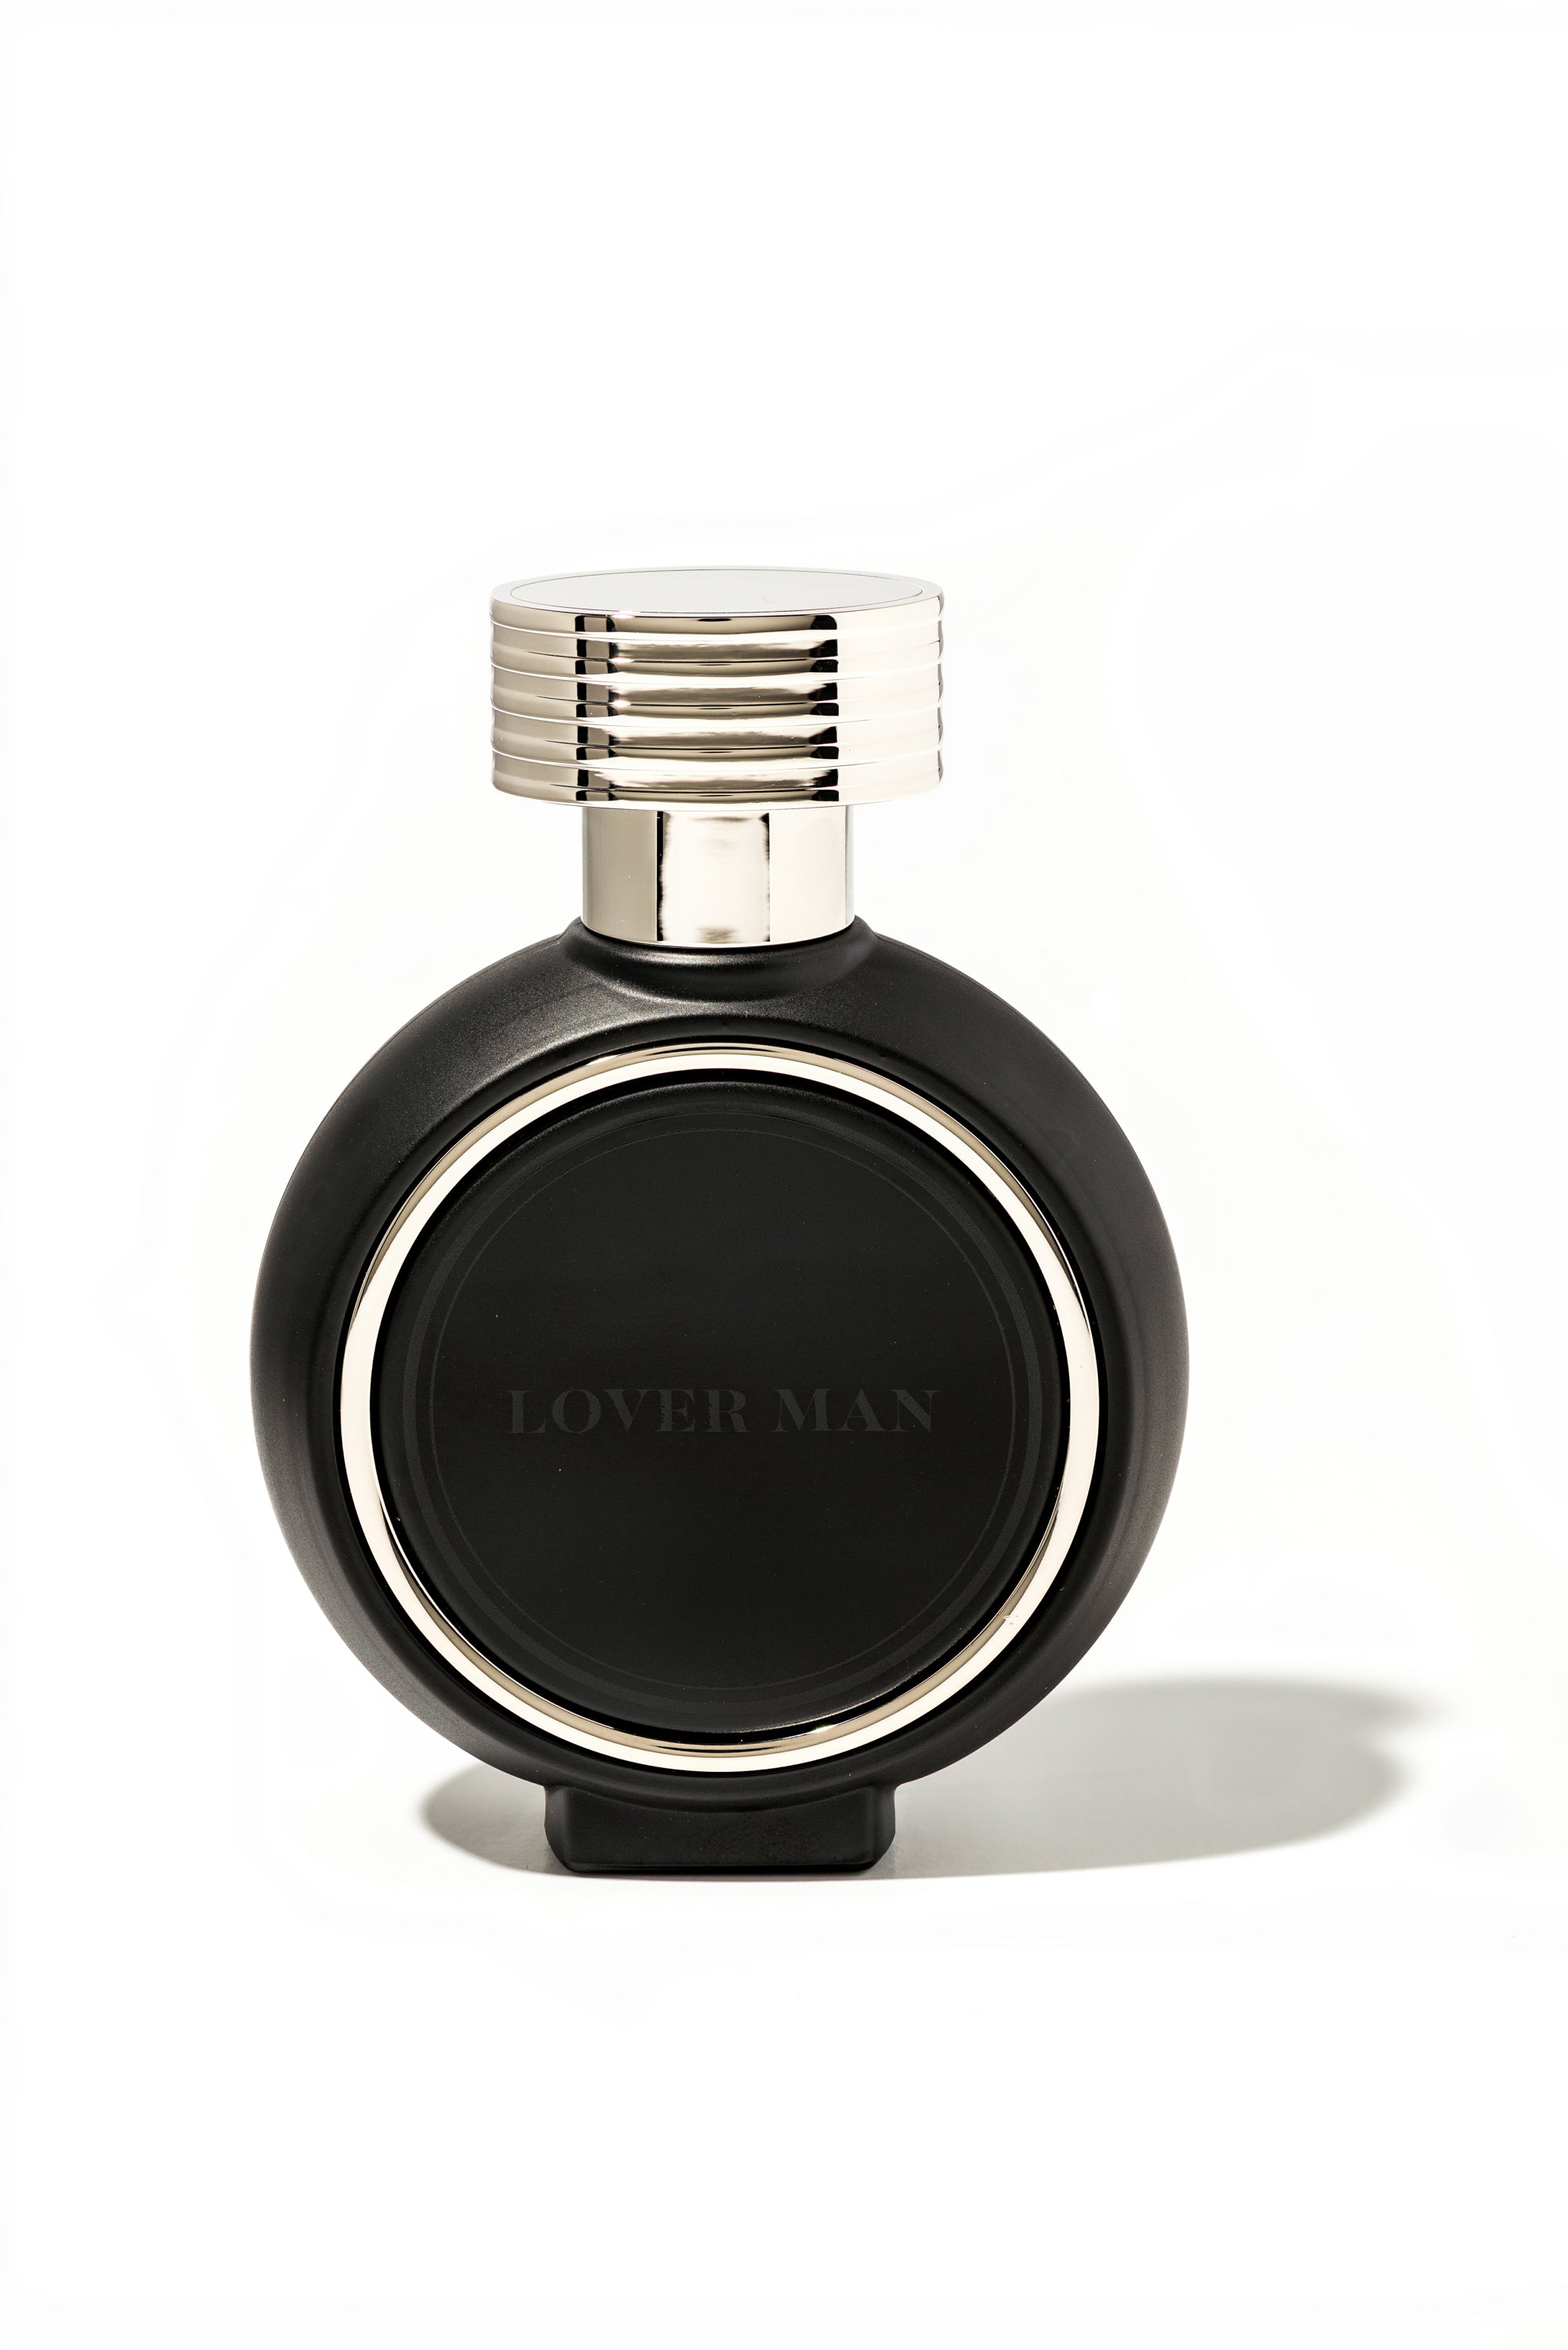 Lover Man - Black Collection